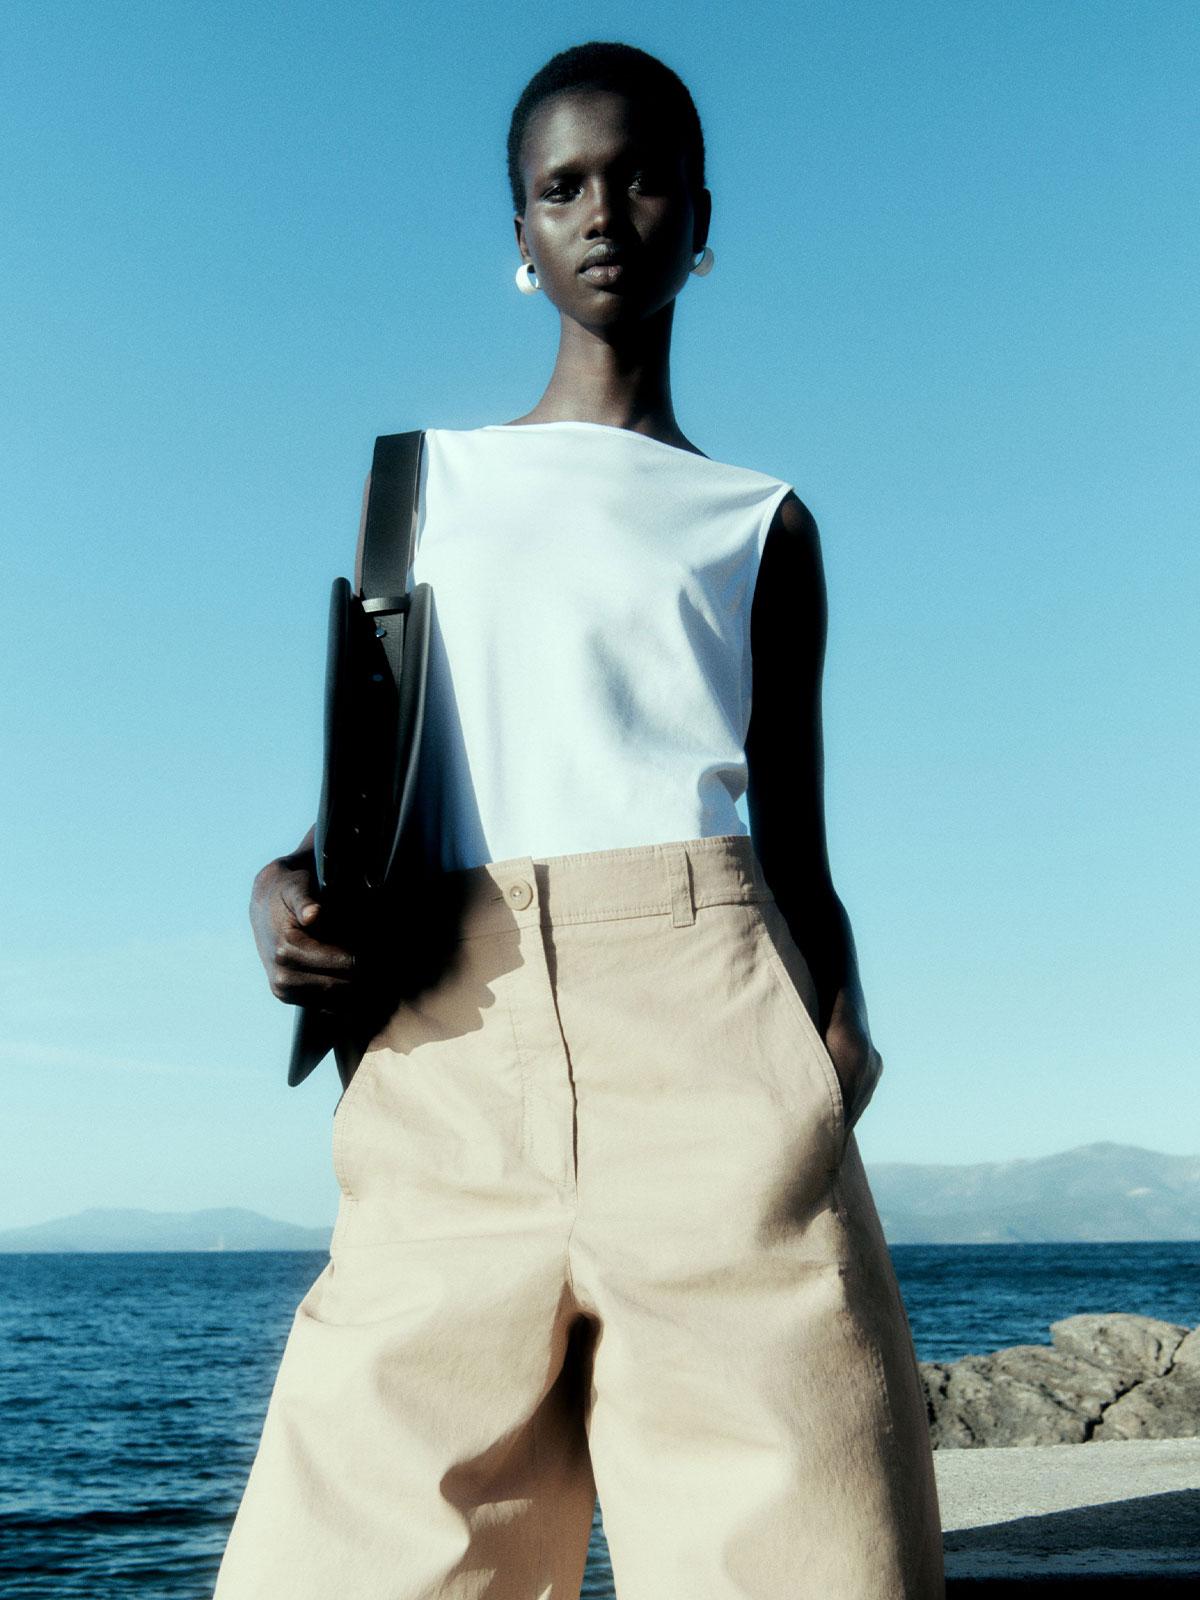 Amar Akway by Robin Galiegue for COS Summer 2021 Ad Campaign. Clothing: COS WHITE BOAT-NECK VEST / COS BEIGE WIDE-LEG LINEN PANTS / COS BLACK LEATHER MINI BAG / COS WHITE TEXTURED HOOP EARRINGS